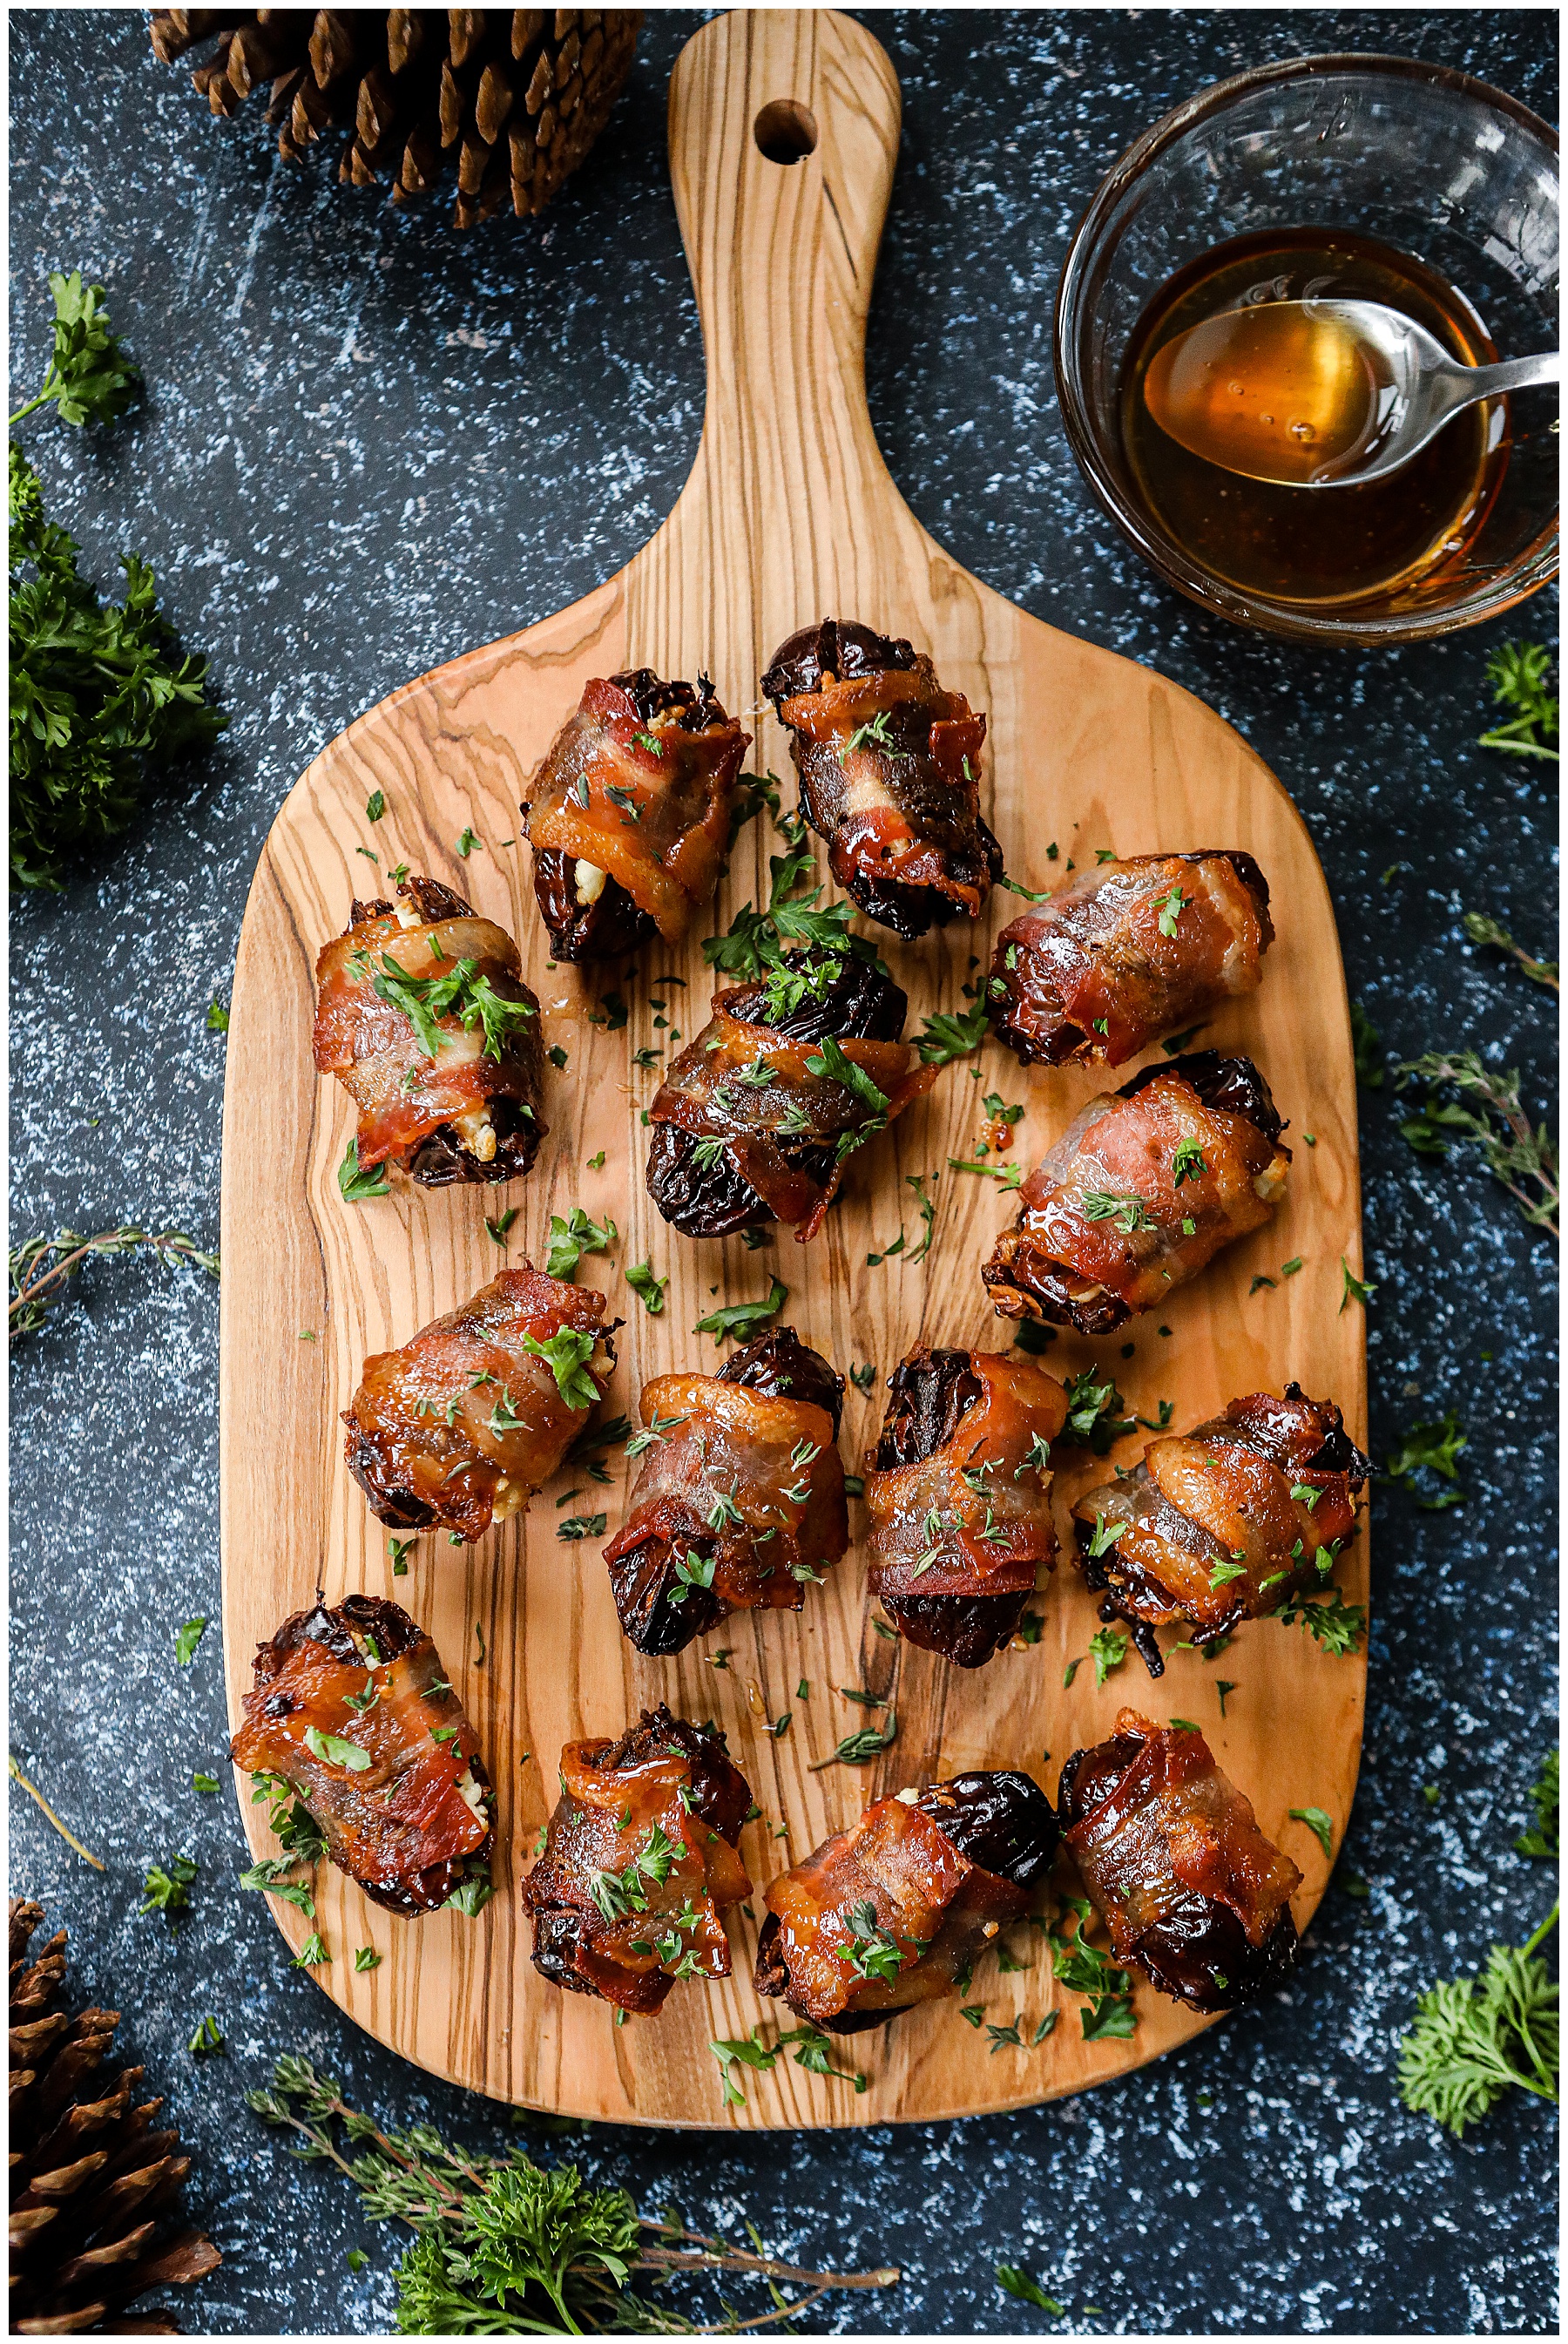  Bacon Wrapped Dates with Goat Cheese